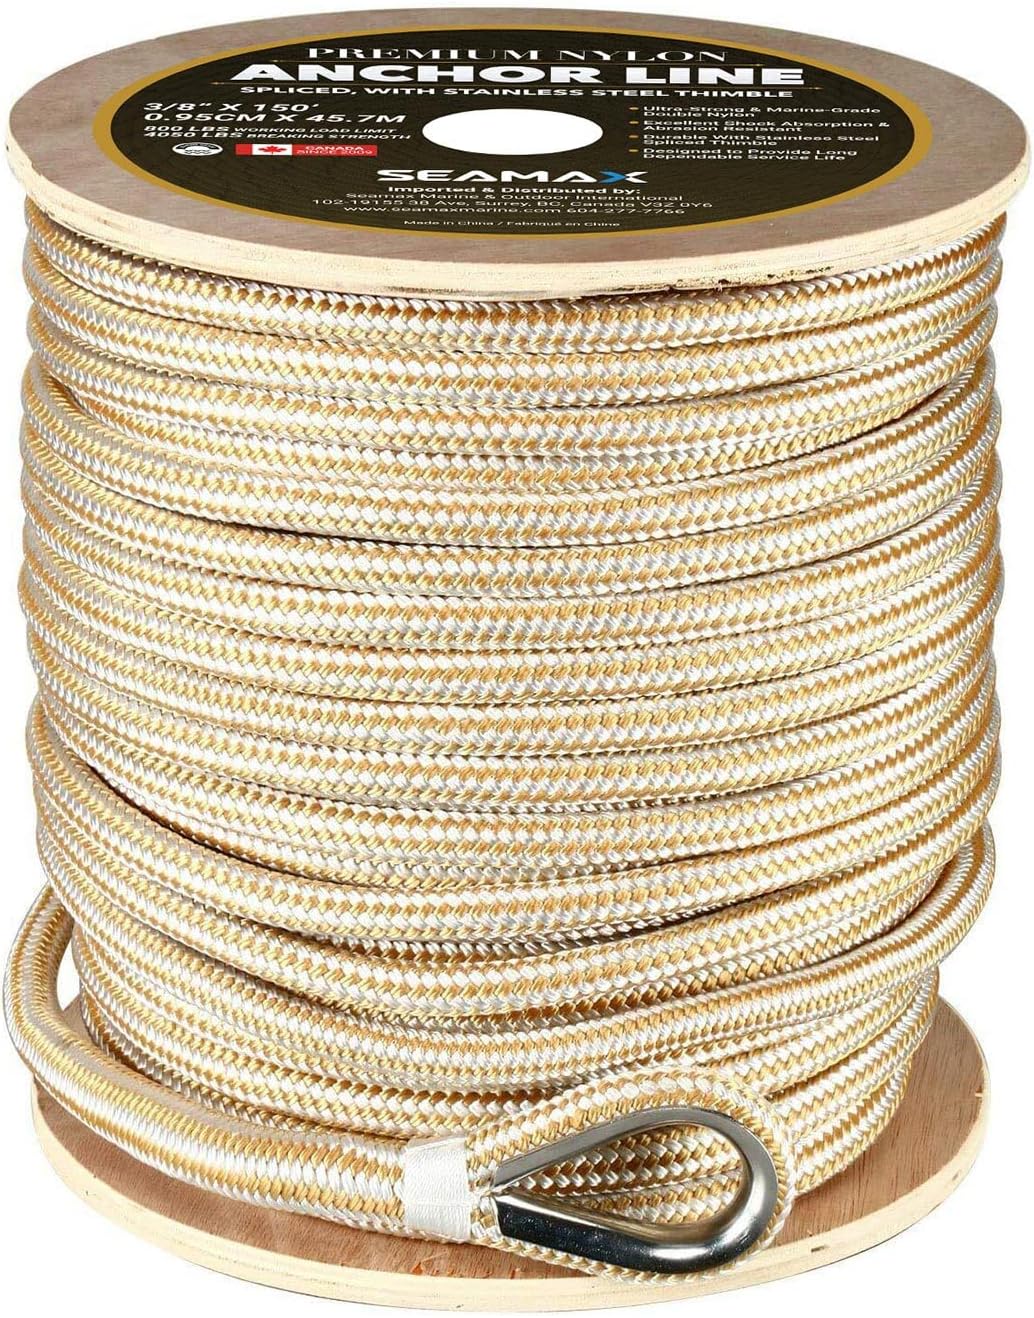 Seamax Marine 1/2 Inch 150 Ft/150Ft/200Ft Double Braided Nylon Anchor Line Heavy-Duty Marine Rope with Steel Spliced Thimble (Gold Color)